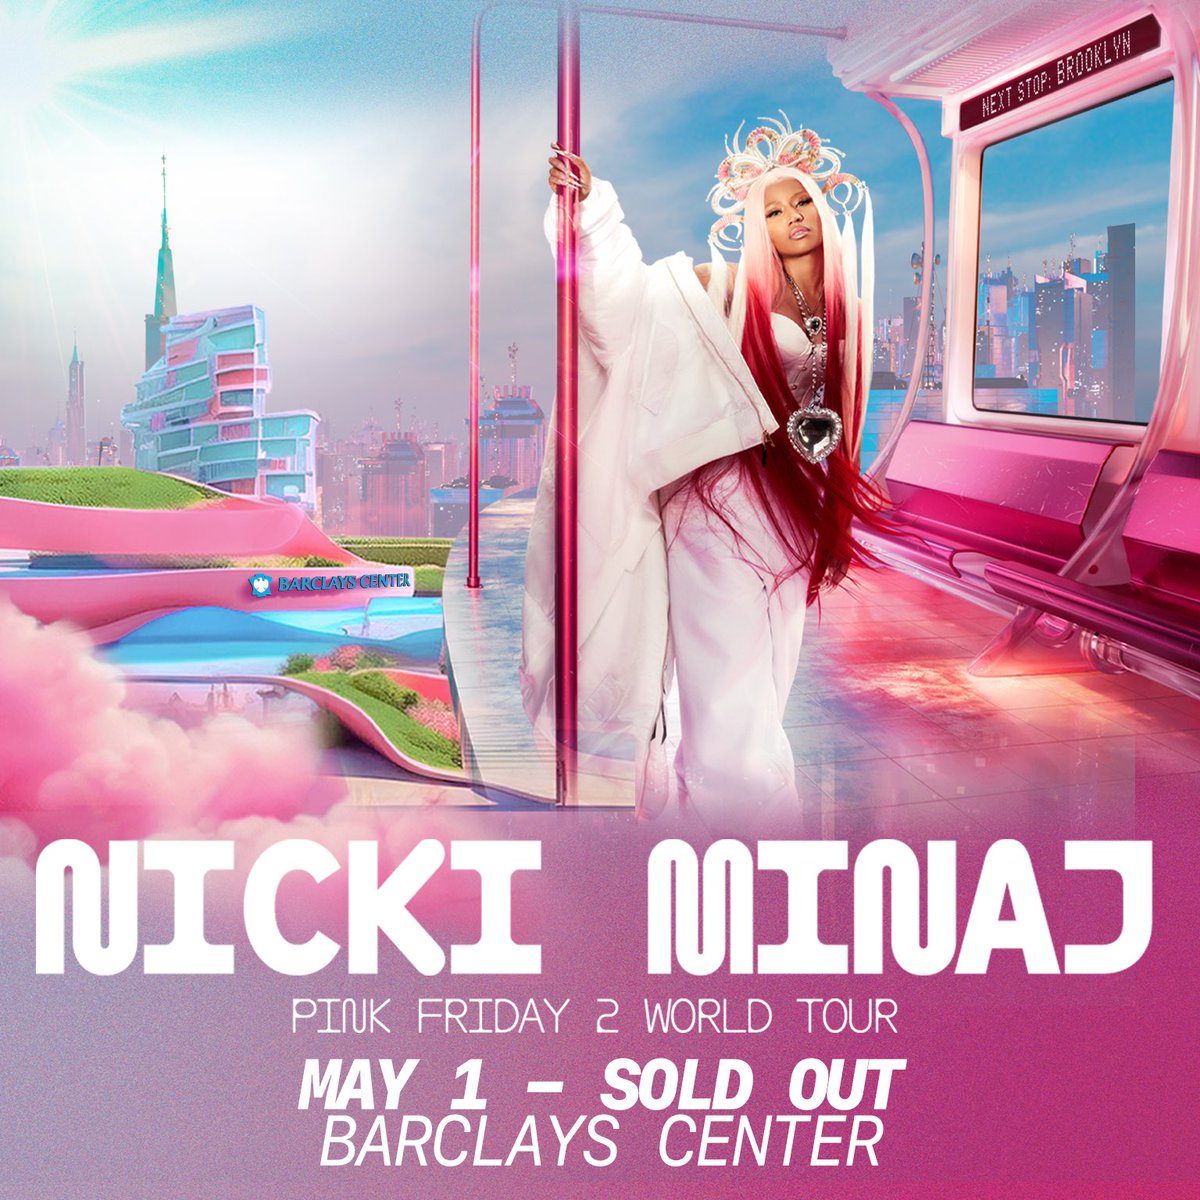 TONIGHT! 𝓣𝓱𝓮 𝓺𝓾𝓮𝓮𝓷 𝓻𝓮𝓽𝓾𝓻𝓷𝓼 𝓽𝓸 𝓑𝓻𝓸𝓸𝓴𝓵𝔂𝓷 @nickiminaj 𝙎𝙊𝙇𝘿 𝙊𝙐𝙏 Doors: 7PM Nicki Minaj merch, including Pink Friday Nails, will be available for early purchase at 4-7PM at the plaza at Barclays Center outside the Main Atrium entrance. No ticket…